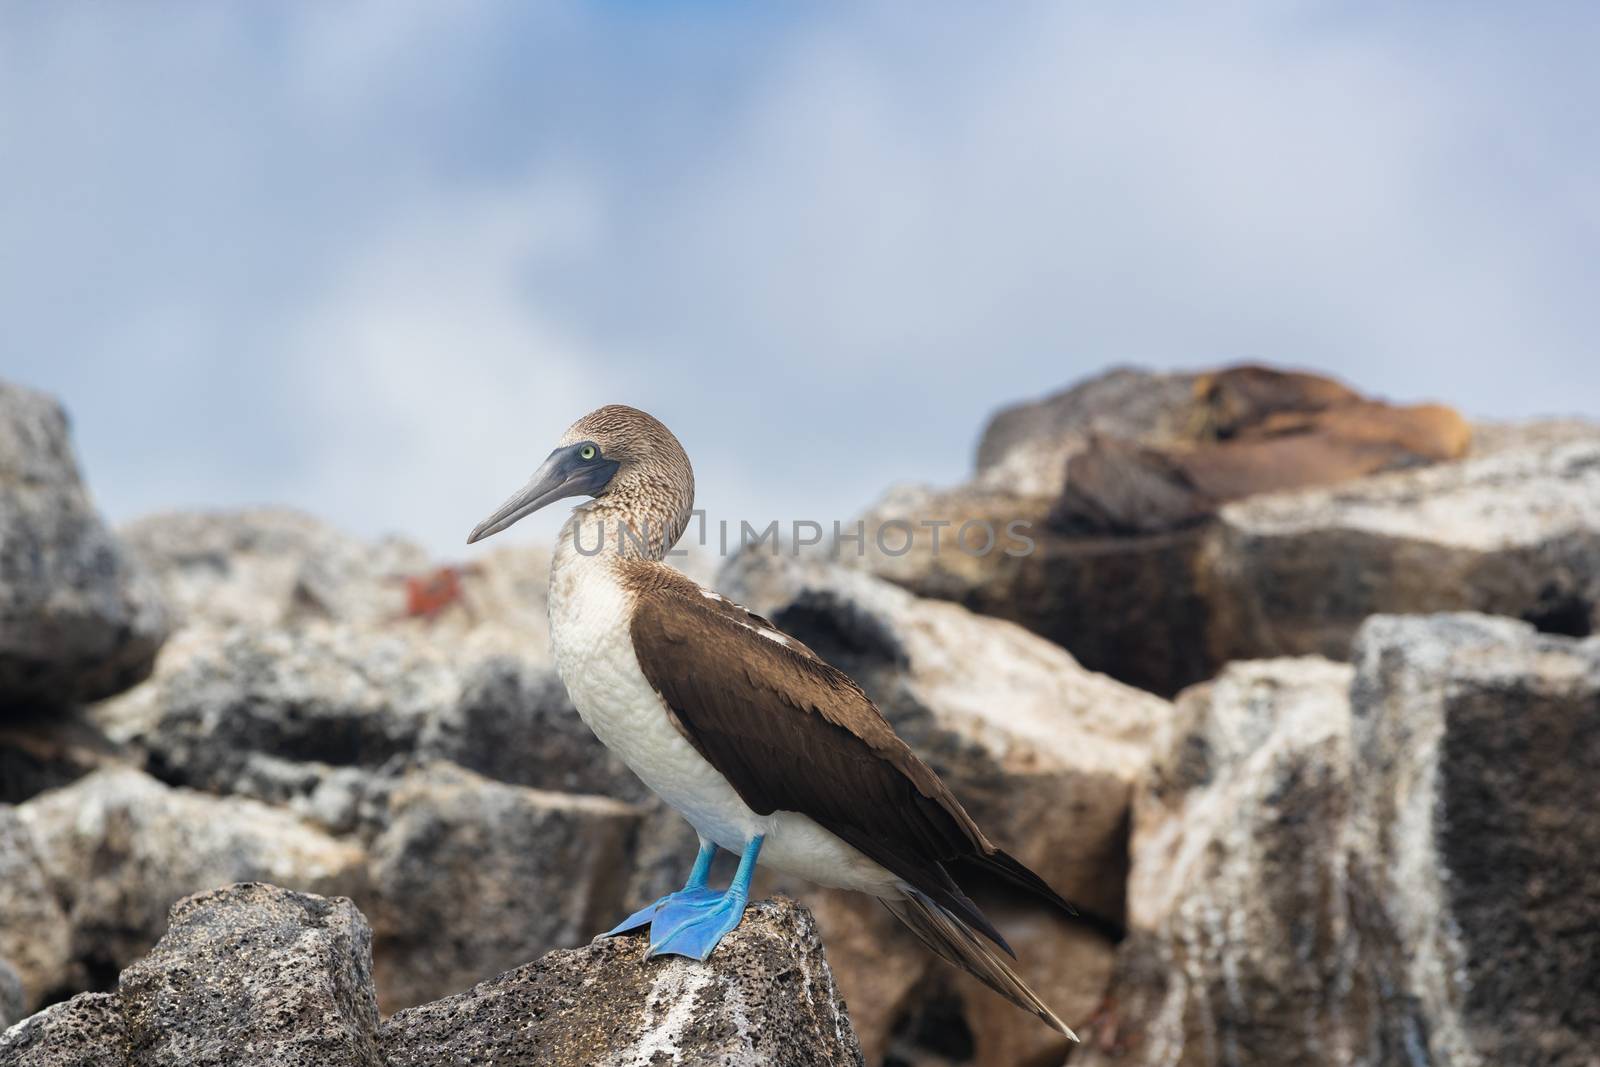 Galapagos animals: Blue-footed Booby - Iconic famous galapagos wildlife by Maridav